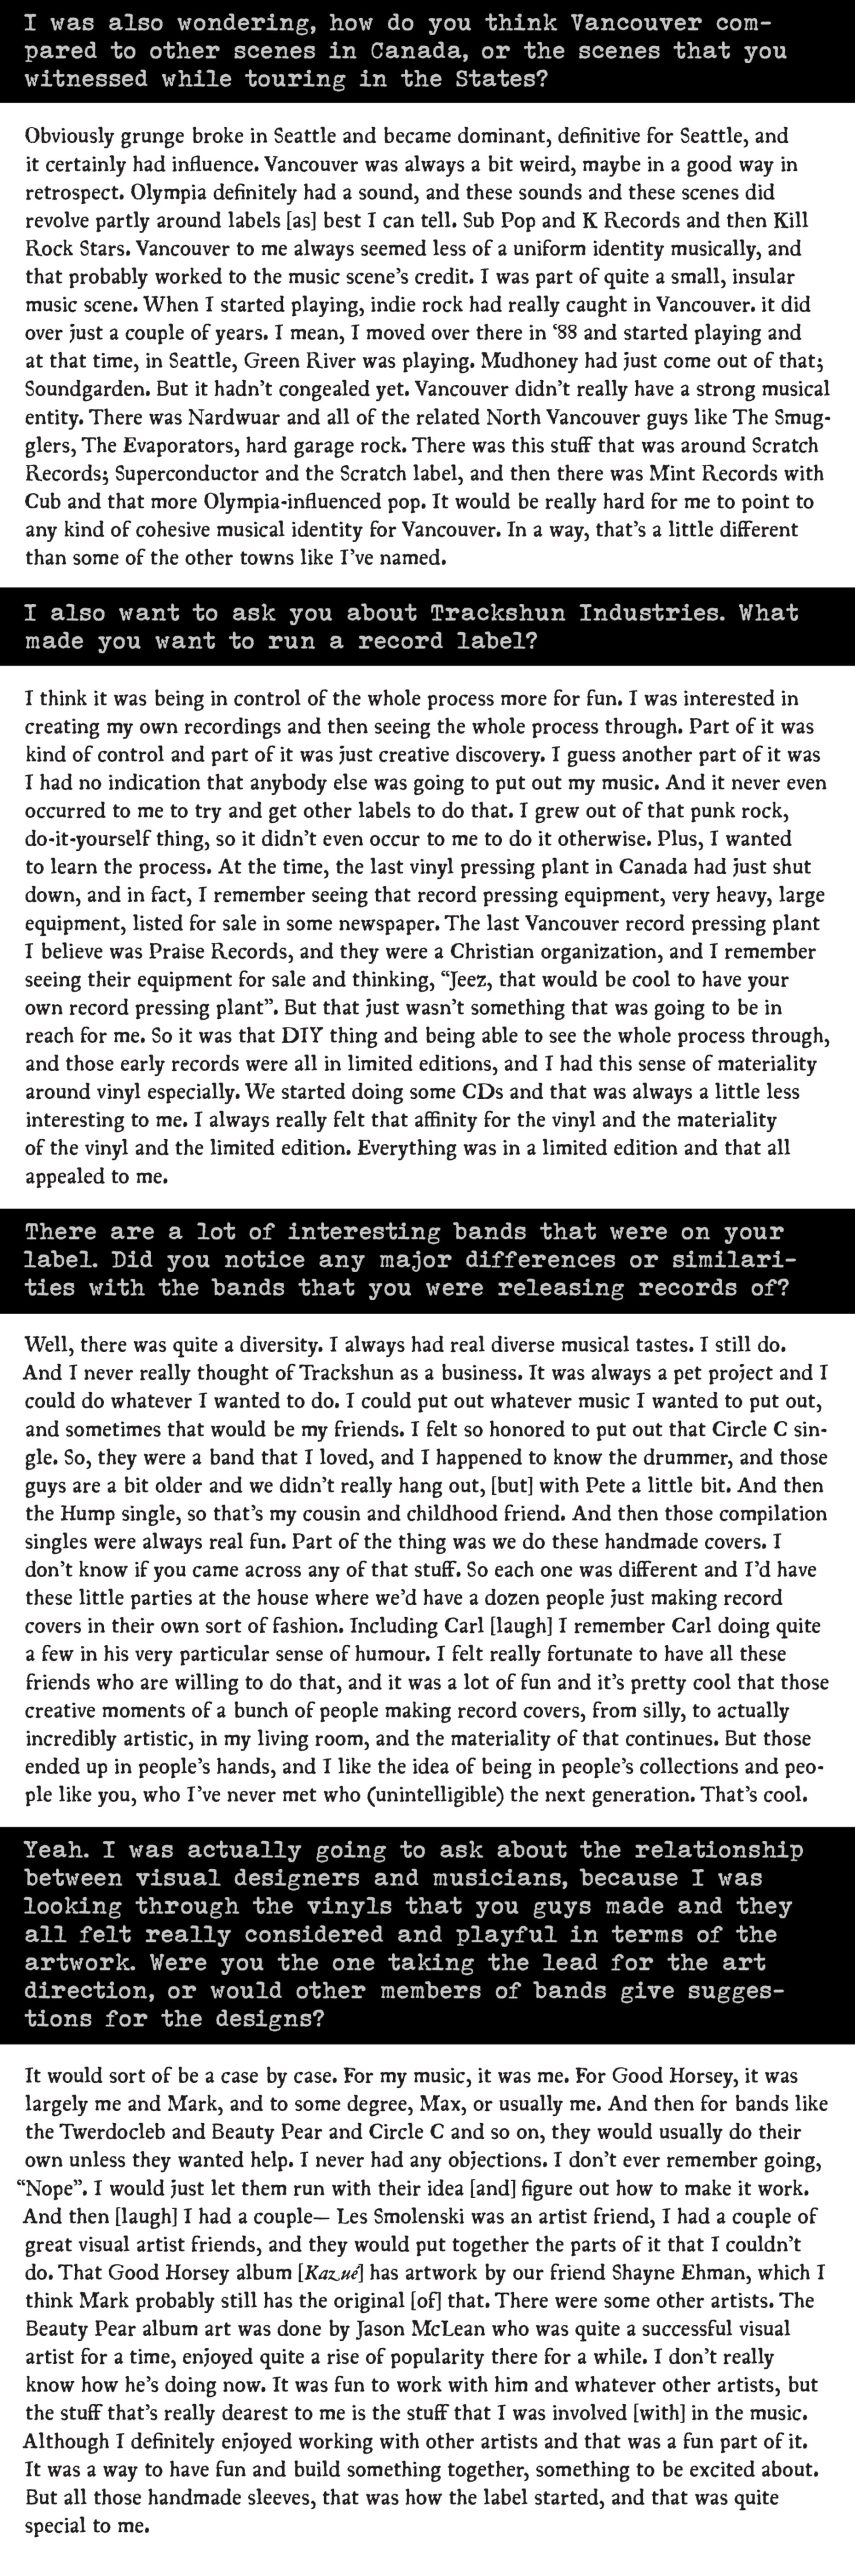 The second part of a PDF of a long fold-out for an interview with Justice Schanfarber which reads: "I was also wondering, how do you think Vancouver compared to other scenes in Canada, or the scenes that you witnessed while touring in the States?

Obviously grunge broke in Seattle and became dominant, definitive for Seattle, and it certainly had influence. Vancouver was always a bit weird, maybe in a good way in retrospect. Olympia definitely had a sound, and these sounds and these scenes did revolve partly around labels [as] best I can tell. Sub Pop and K Records and then Kill Rock Stars. Vancouver to me always seemed less of a uniform identity musically, and that probably worked to the music scene’s credit. I was part of quite a small, insular music scene. When I started playing, indie rock had really caught in Vancouver. it did over just a couple of years. I mean, I moved over there in ‘88 and started playing and at that time, in Seattle, Green River was playing. Mudhoney had just come out of that; Soundgarden. But it hadn’t congealed yet. Vancouver didn’t really have a strong musical entity. There was Nardwuar and all of the related North Vancouver guys like The Smugglers, The Evaporators, hard garage rock. There was this stuff that was around Scratch Records; Superconductor and the Scratch label, and then there was Mint Records with Cub and that more Olympia-influenced pop. It would be really hard for me to point to any kind of cohesive musical identity for Vancouver. In a way, that’s a little different than some of the other towns like I’ve named.

I also want to ask you about Trackshun Industries. What made you want to run a record label? 

I think it was being in control of the whole process more for fun. I was interested in creating my own recordings and then seeing the whole process through. Part of it was kind of control and part of it was just creative discovery. I guess another part of it was I had no indication that anybody else was going to put out my music. And it never even occurred to me to try and get other labels to do that. I grew out of that punk rock, do-it-yourself thing, so it didn’t even occur to me to do it otherwise. Plus, I wanted to learn the process. At the time, the last vinyl pressing plant in Canada had just shut down, and in fact, I remember seeing that record pressing equipment, very heavy, large equipment, listed for sale in some newspaper. The last Vancouver record pressing plant I believe was Praise Records, and they were a Christian organization, and I remember seeing their equipment for sale and thinking, “Jeez, that would be cool to have your own record pressing plant”. But that just wasn’t something that was going to be in reach for me. So it was that DIY thing and being able to see the whole process through, and those early records were all in limited editions, and I had this sense of materiality around vinyl especially. We started doing some CDs and that was always a little less interesting to me. I always really felt that affinity for the vinyl and the materiality of the vinyl and the limited edition. Everything was in a limited edition and that all appealed to me.

There are a lot of interesting bands that were on your label. Did you notice any major differences or similarities with the bands that you were releasing records of?

Well, there was quite a diversity. I always had real diverse musical tastes. I still do. And I never really thought of Trackshun as a business. It was always a pet project and I could do whatever I wanted to do. I could put out whatever music I wanted to put out, and sometimes that would be my friends. I felt so honored to put out that Circle C single. So, they were a band that I loved, and I happened to know the drummer, and those guys are a bit older and we didn’t really hang out, [but] with Pete a little bit. And then the Hump single, so that’s my cousin and childhood friend. And then those compilation singles were always real fun. Part of the thing was we do these handmade covers. I don’t know if you came across any of that stuff. So each one was different and I’d have these little parties at the house where we’d have a dozen people just making record covers in their own sort of fashion. Including Carl [laugh] I remember Carl doing quite a few in his very particular sense of humour. I felt really fortunate to have all these friends who are willing to do that, and it was a lot of fun and it’s pretty cool that those creative moments of a bunch of people making record covers, from silly, to actually incredibly artistic, in my living room, and the materiality of that continues. But those ended up in people’s hands, and I like the idea of being in people’s collections and people like you, who I’ve never met who (unintelligible) the next generation. That’s cool.

Yeah. I was actually going to ask about the relationship between visual designers and musicians, because I was looking through the vinyls that you guys made and they all felt really considered and playful in terms of the artwork. Were you the one taking the lead for the art direction, or would other members of bands give suggestions for the designs?

It would sort of be a case by case. For my music, it was me. For Good Horsey, it was largely me and Mark, and to some degree, Max, or usually me. And then for bands like the Twerdocleb and Beauty Pear and Circle C and so on, they would usually do their own unless they wanted help. I never had any objections. I don’t ever remember going, “Nope”. I would just let them run with their idea [and] figure out how to make it work. And then [laugh] I had a couple— Les Smolenski was an artist friend, I had a couple of great visual artist friends, and they would put together the parts of it that I couldn’t do. That Good Horsey album [Kazué] has artwork by our friend Shayne Ehman, which I think Mark probably still has the original [of] that. There were some other artists. The Beauty Pear album art was done by Jason McLean who was quite a successful visual artist for a time, enjoyed quite a rise of popularity there for a while. I don’t really know how he’s doing now. It was fun to work with him and whatever other artists, but the stuff that’s really dearest to me is the stuff that I was involved [with] in the music. Although I definitely enjoyed working with other artists and that was a fun part of it. It was a way to have fun and build something together, something to be excited about. But all those handmade sleeves, that was how the label started, and that was quite special to me."